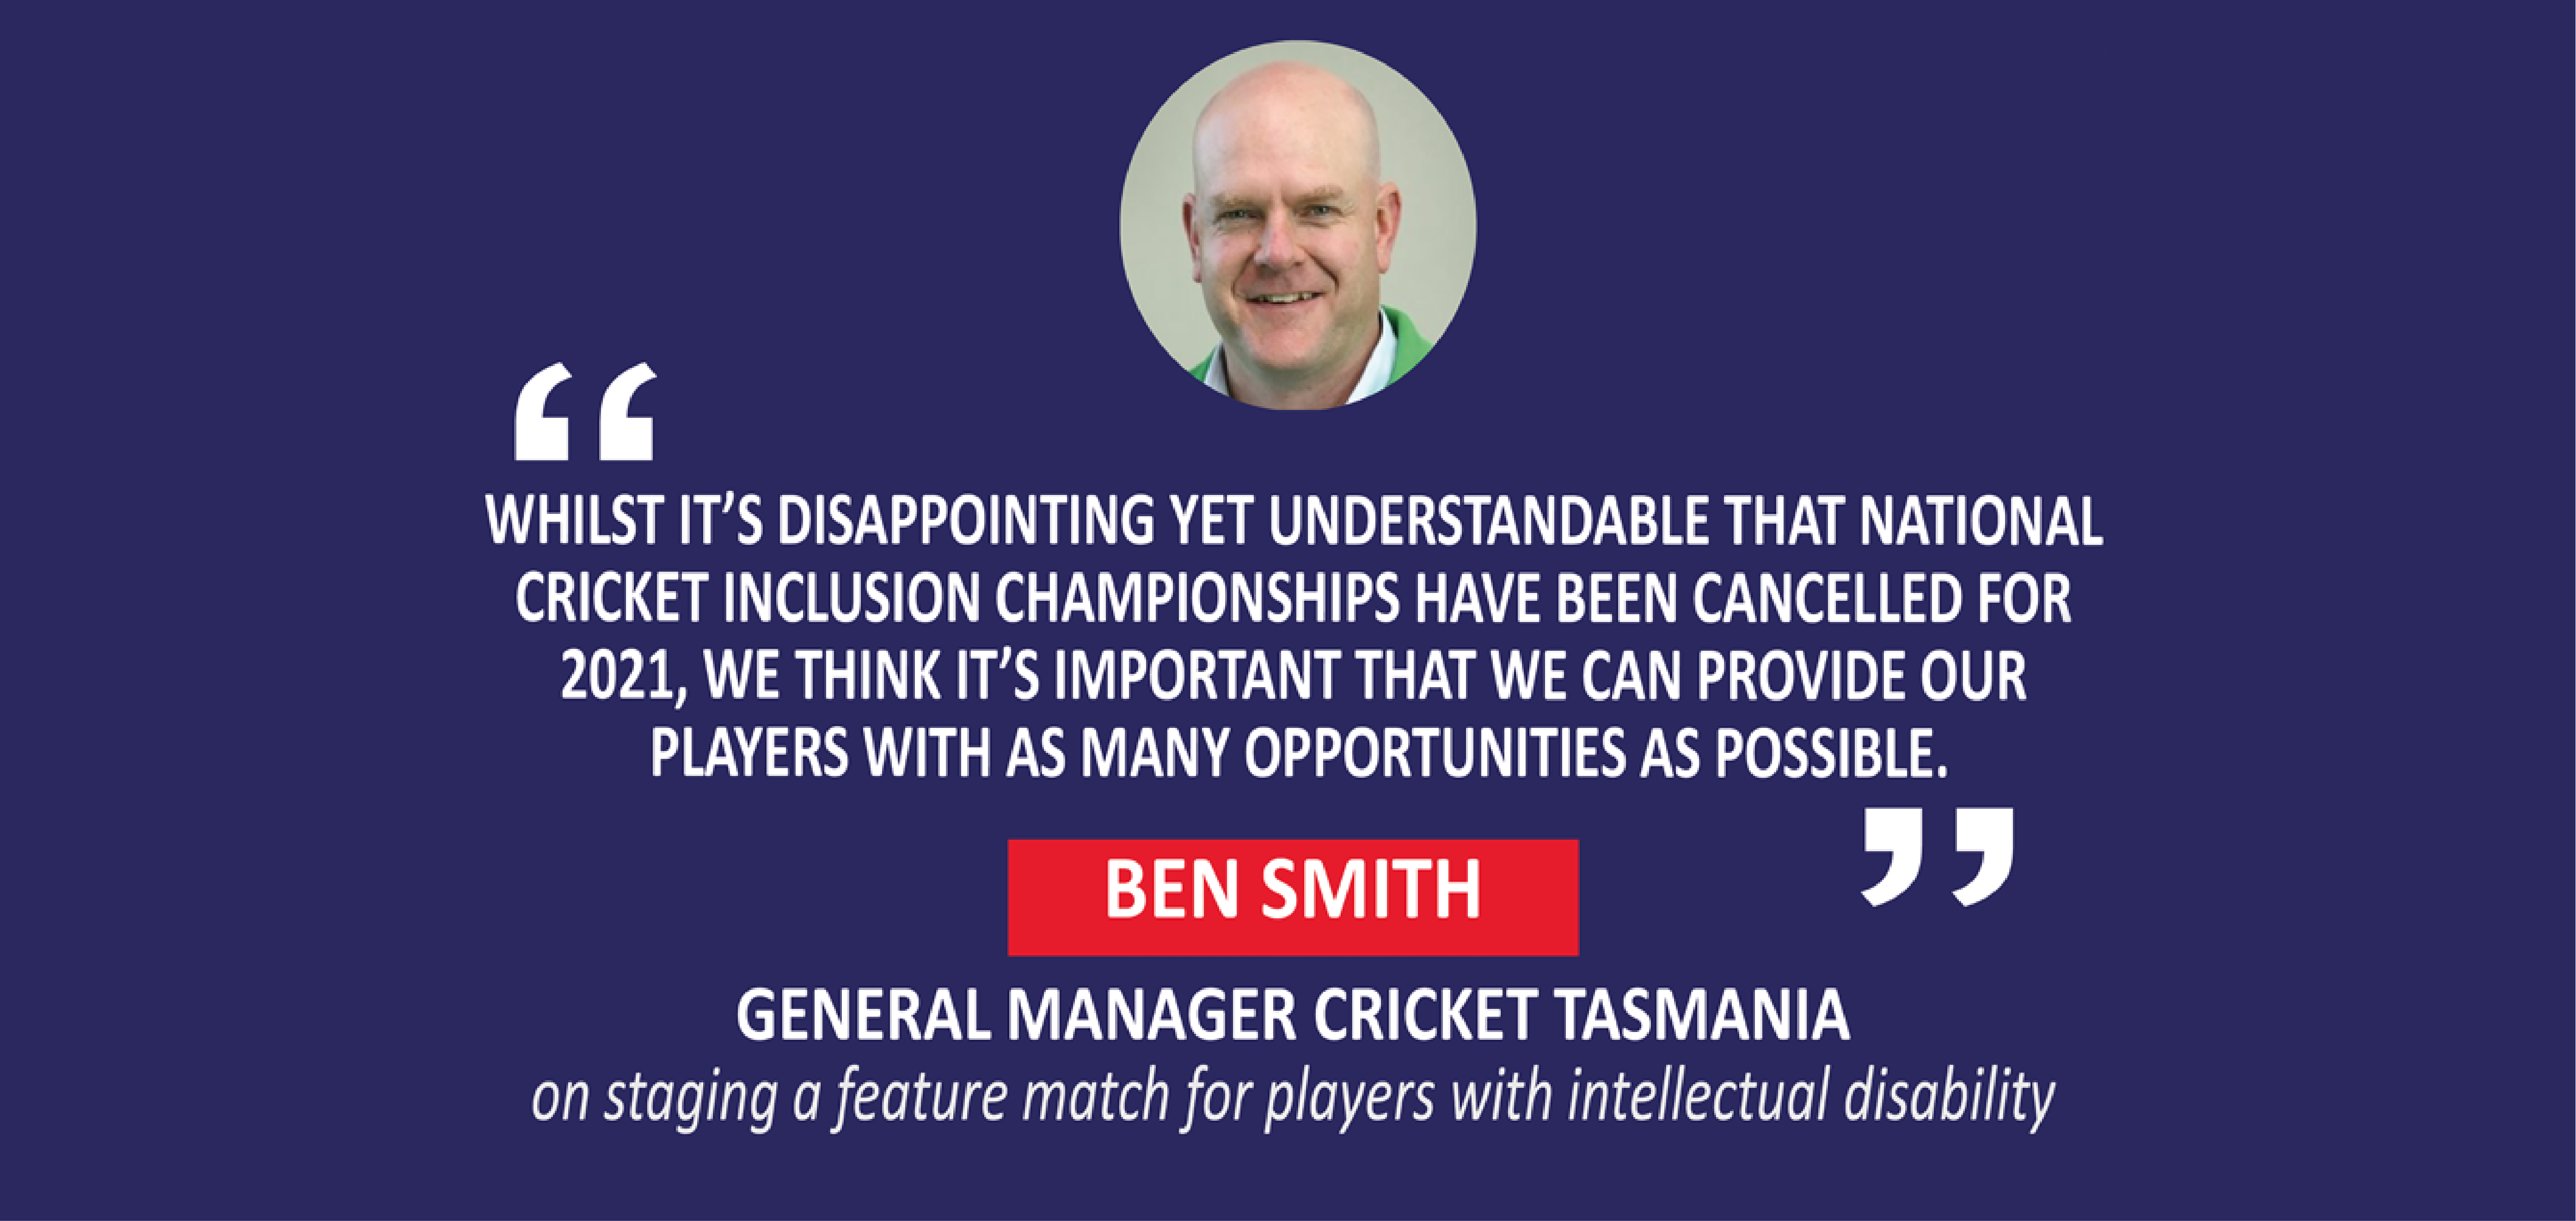 Ben Smith, General Manager Cricket Tasmania on staging a feature match for players with intellectual disability